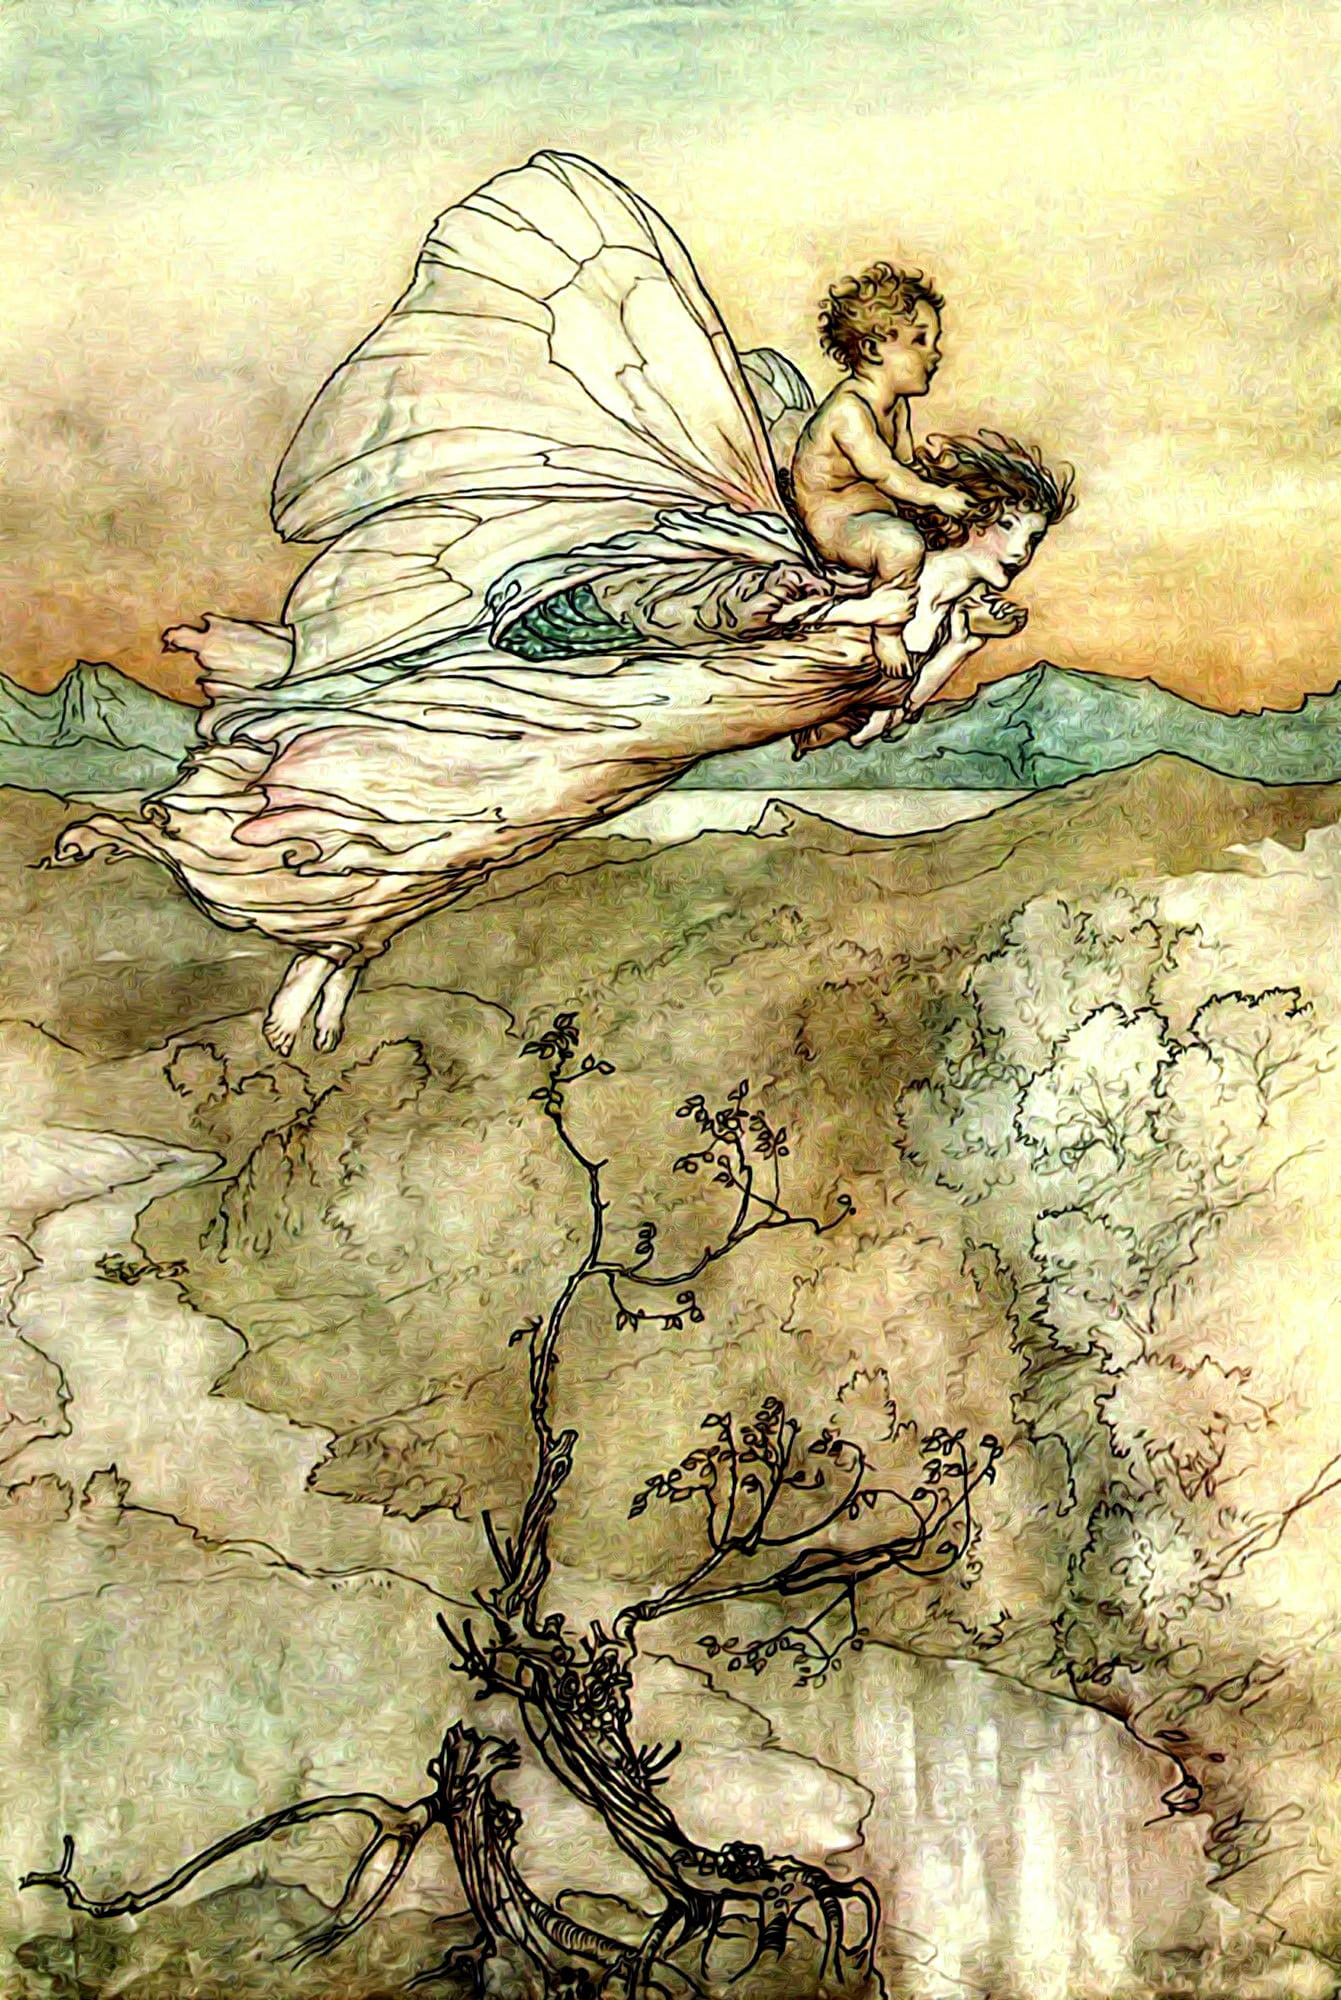 Sylph fairy of the Air - illustration by Arthur Rackham to the 1908 edition of A Midsummer Night's Dream